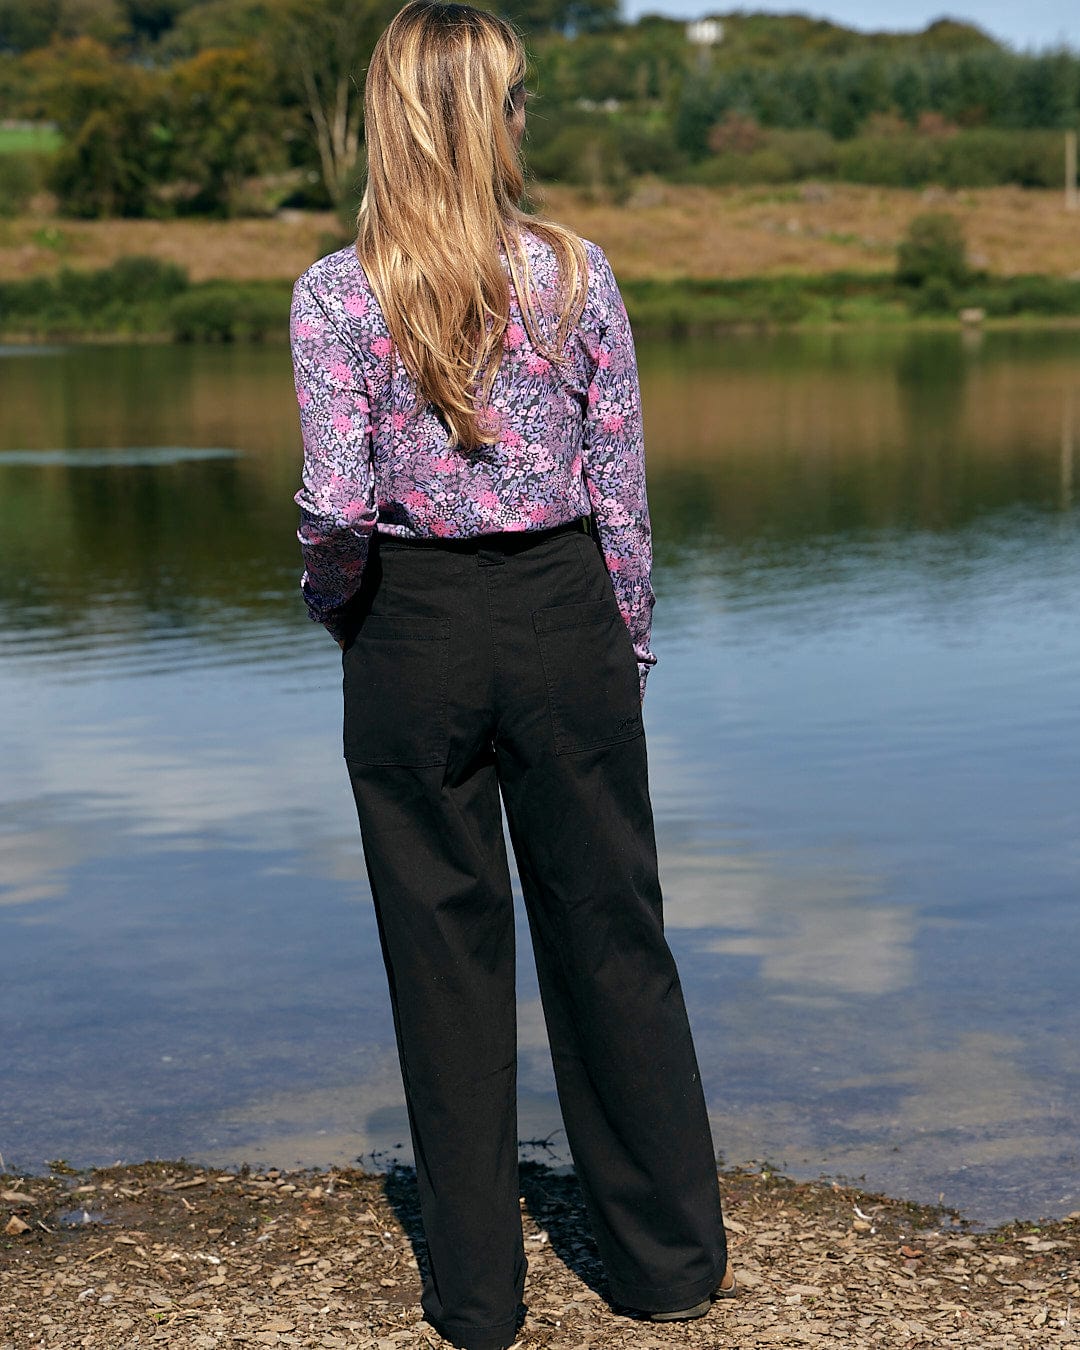 The Saltrock Hilda Twill - Womens Trouser - Black, worn by a woman standing by a body of water.